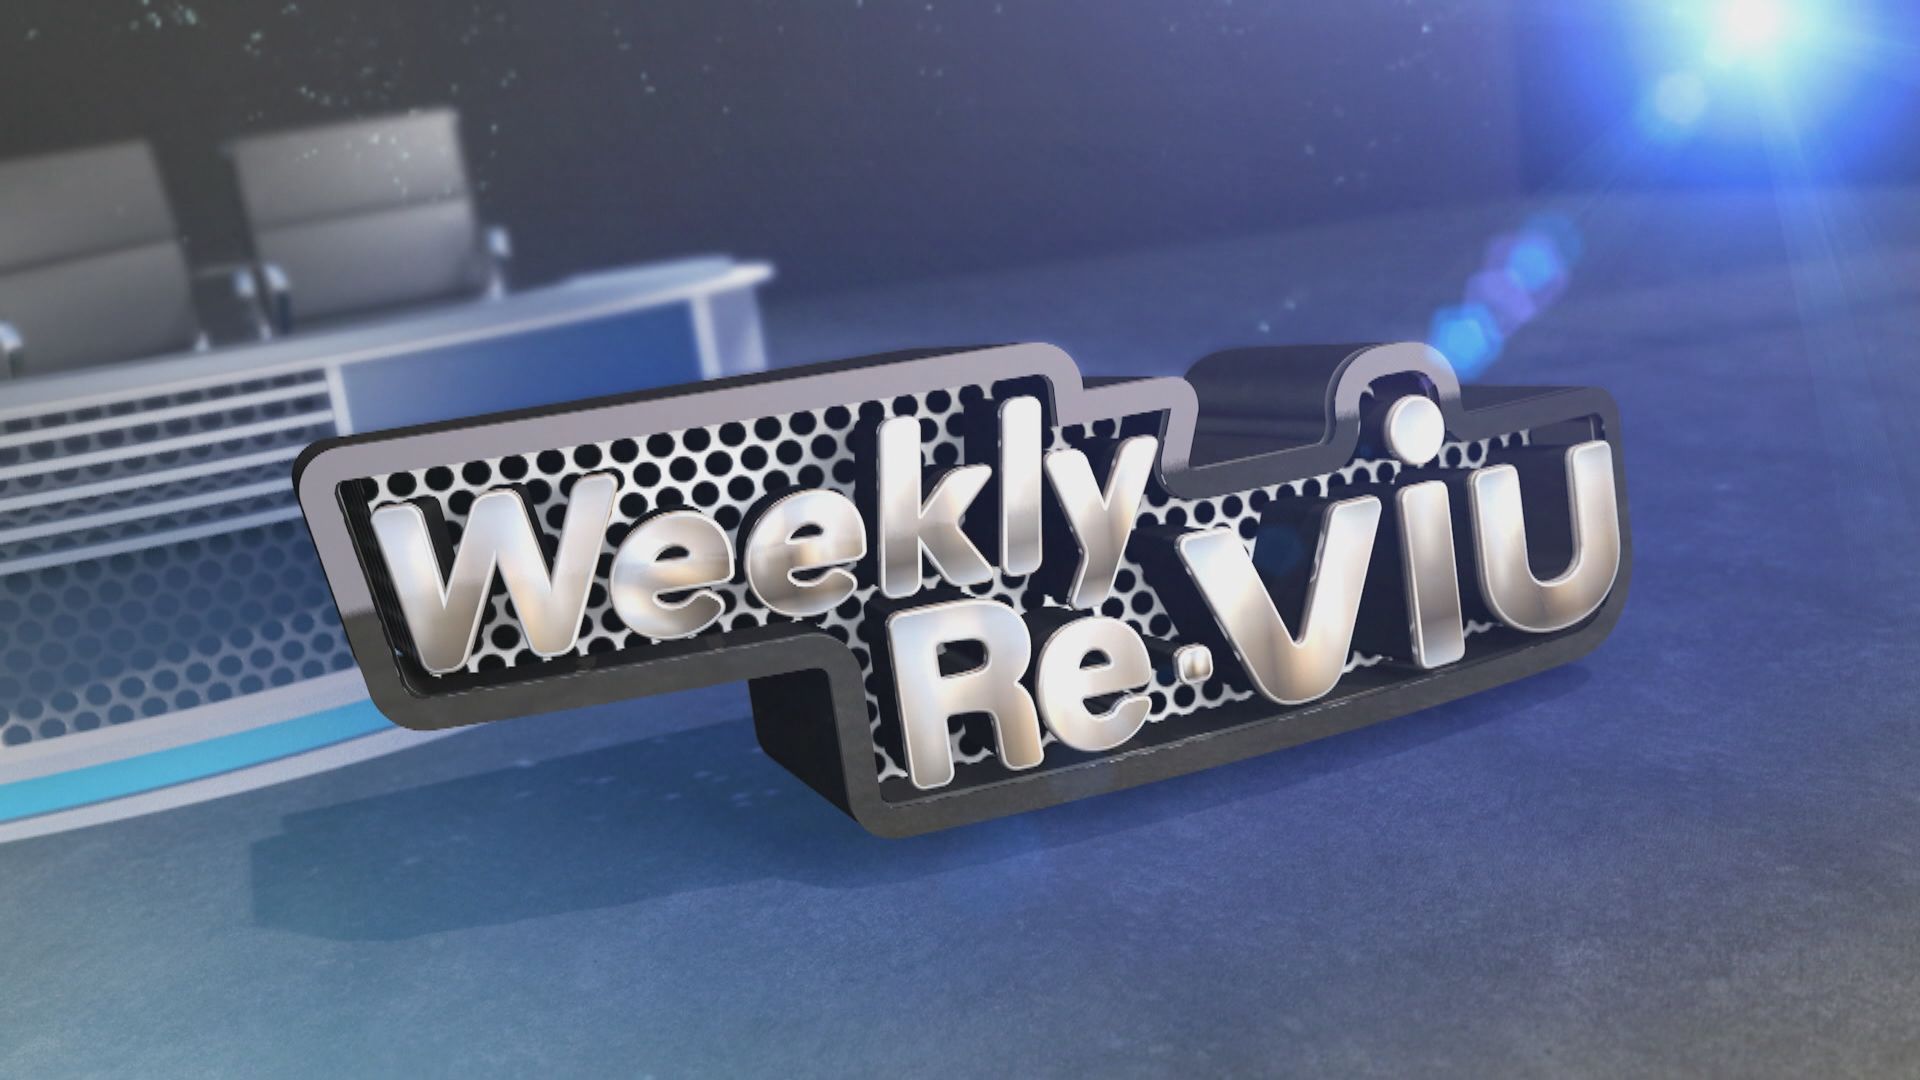 Weekly ReViu | Part Two - Story Roundup (22.4.2023)